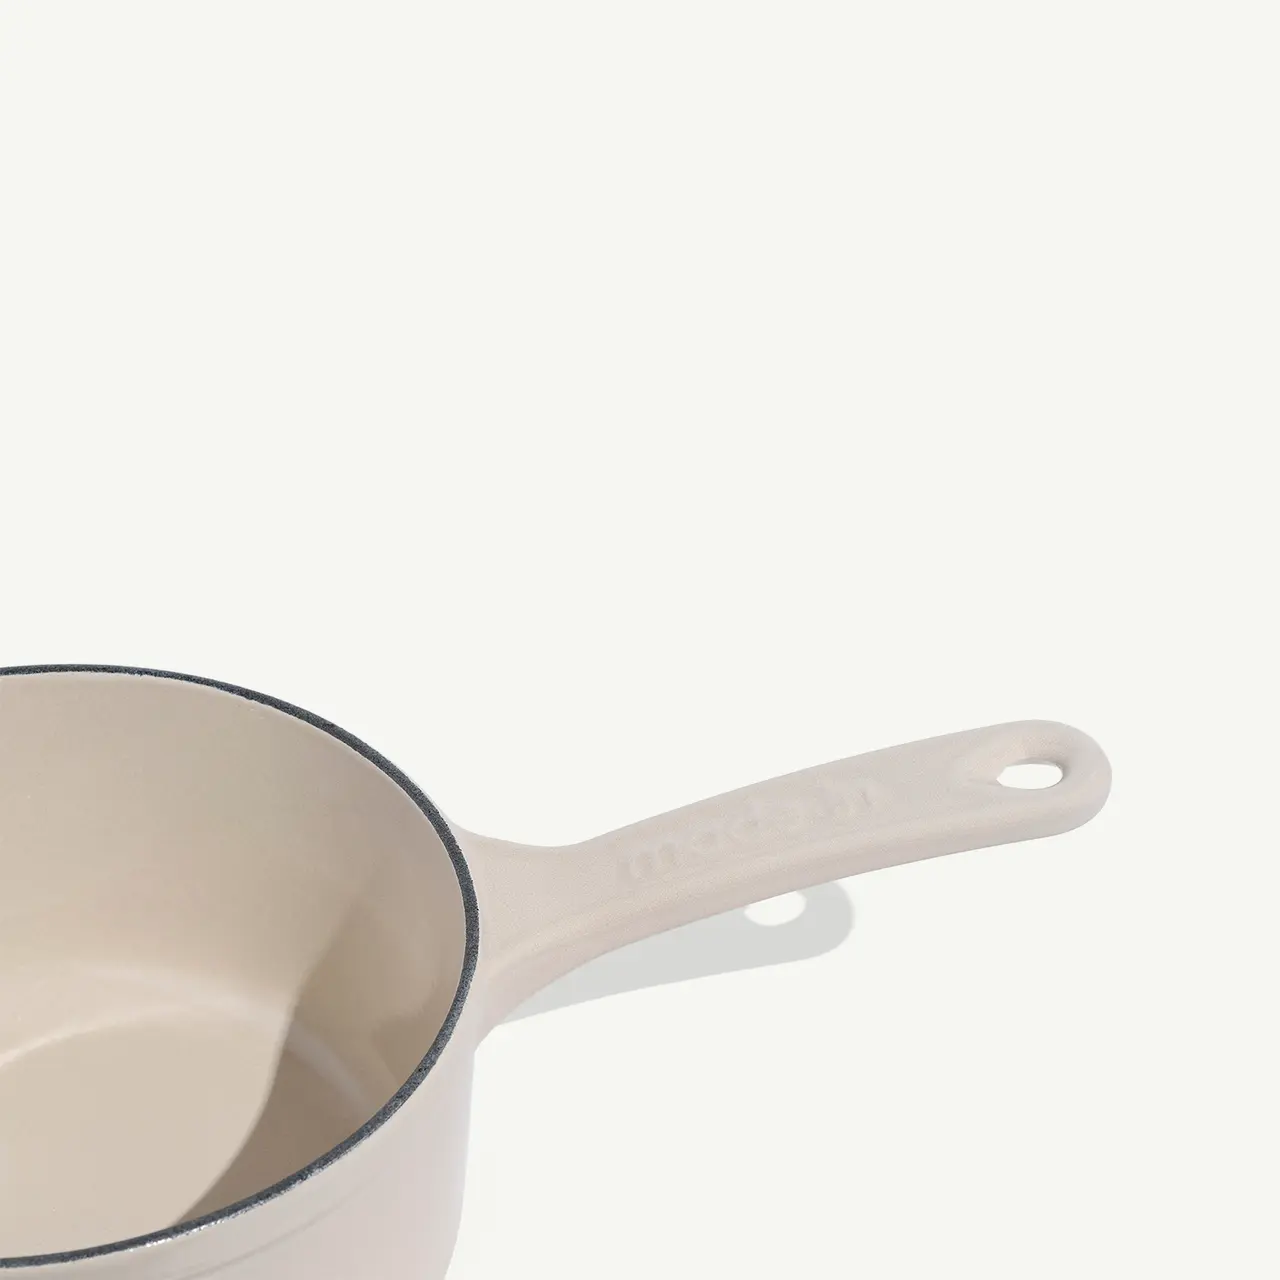 A cream-colored saucepan with a contrasting dark rim sits isolated against a light backdrop.